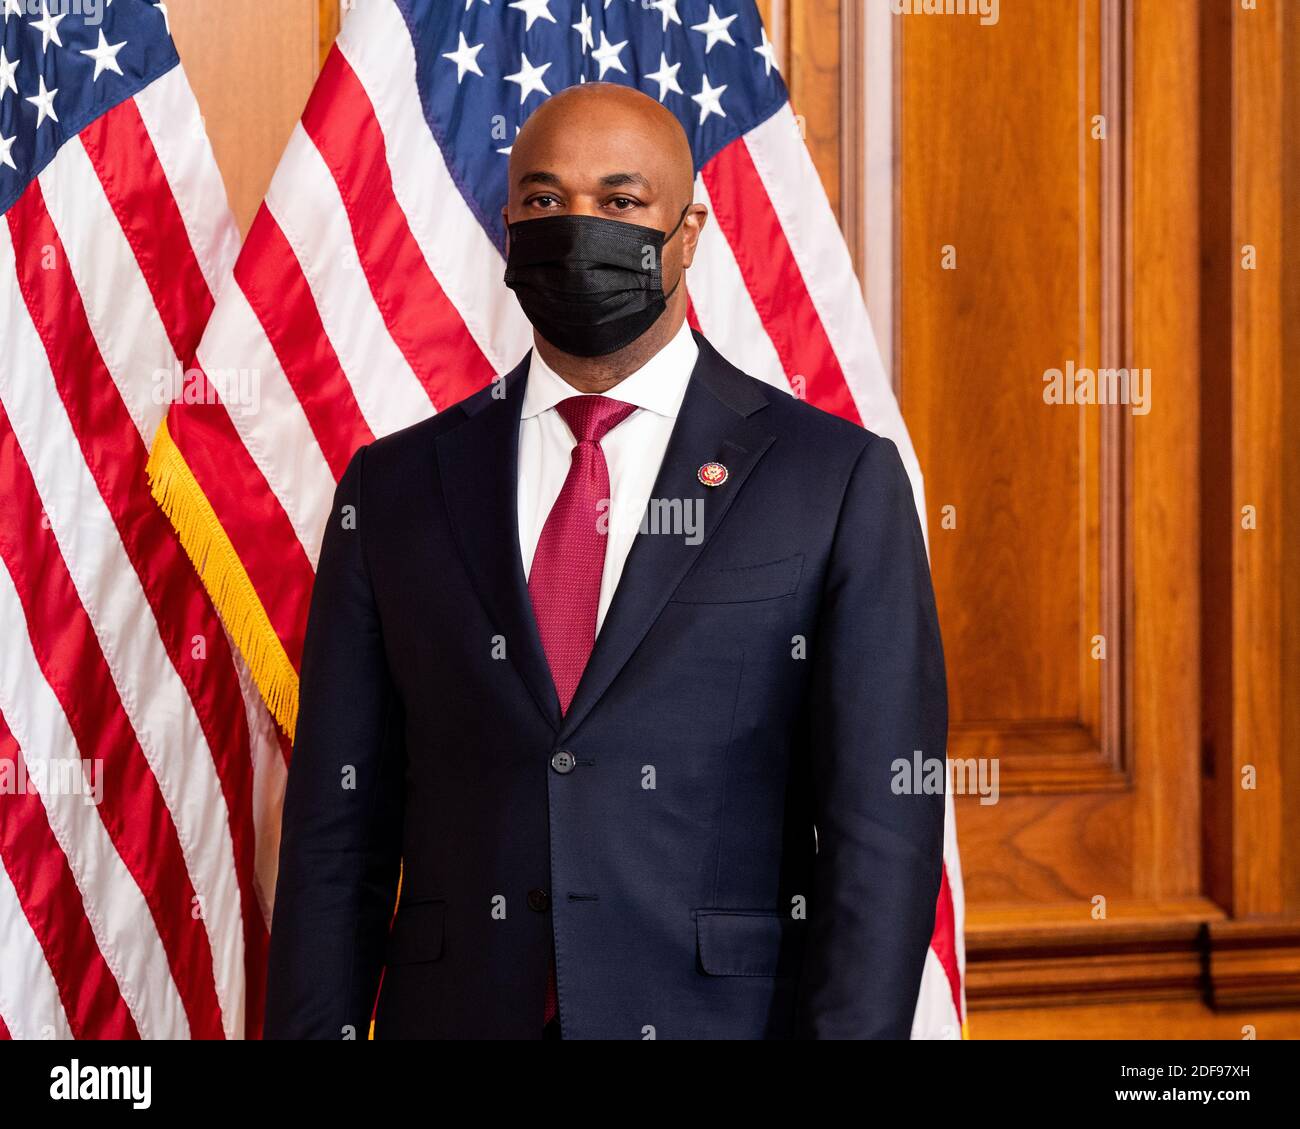 Congressman Kwanza Hall (D-GA) attends his ceremonial swearing-in held in the Rayburn Room at the U.S. Capitol. Stock Photo